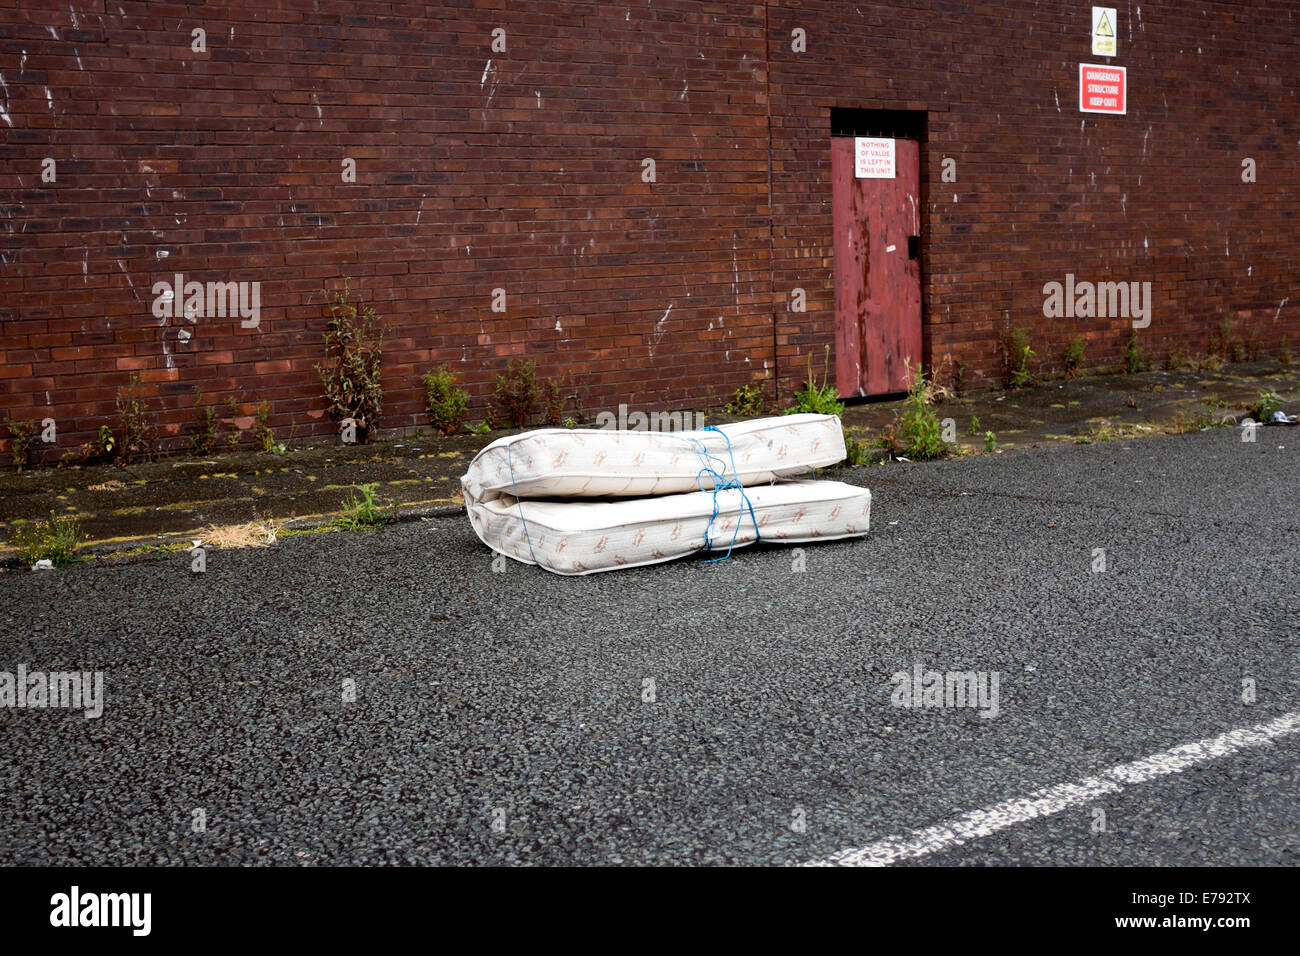 Fly Tipping Dumped Mattress Street Rubbish Illegal Stock Photo